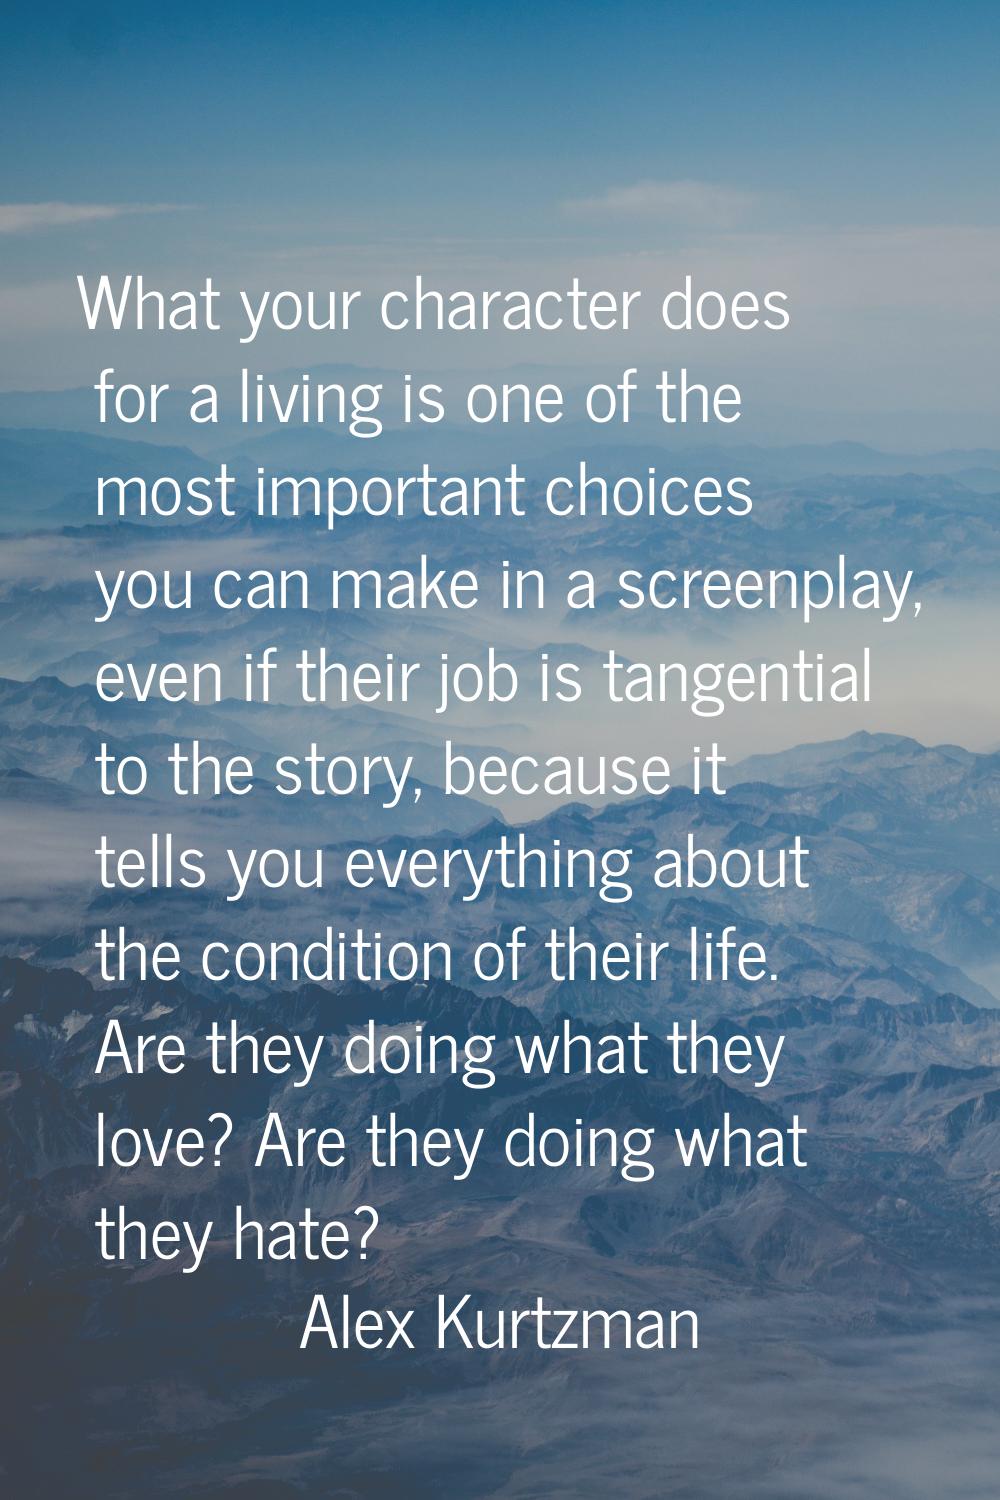 What your character does for a living is one of the most important choices you can make in a screen